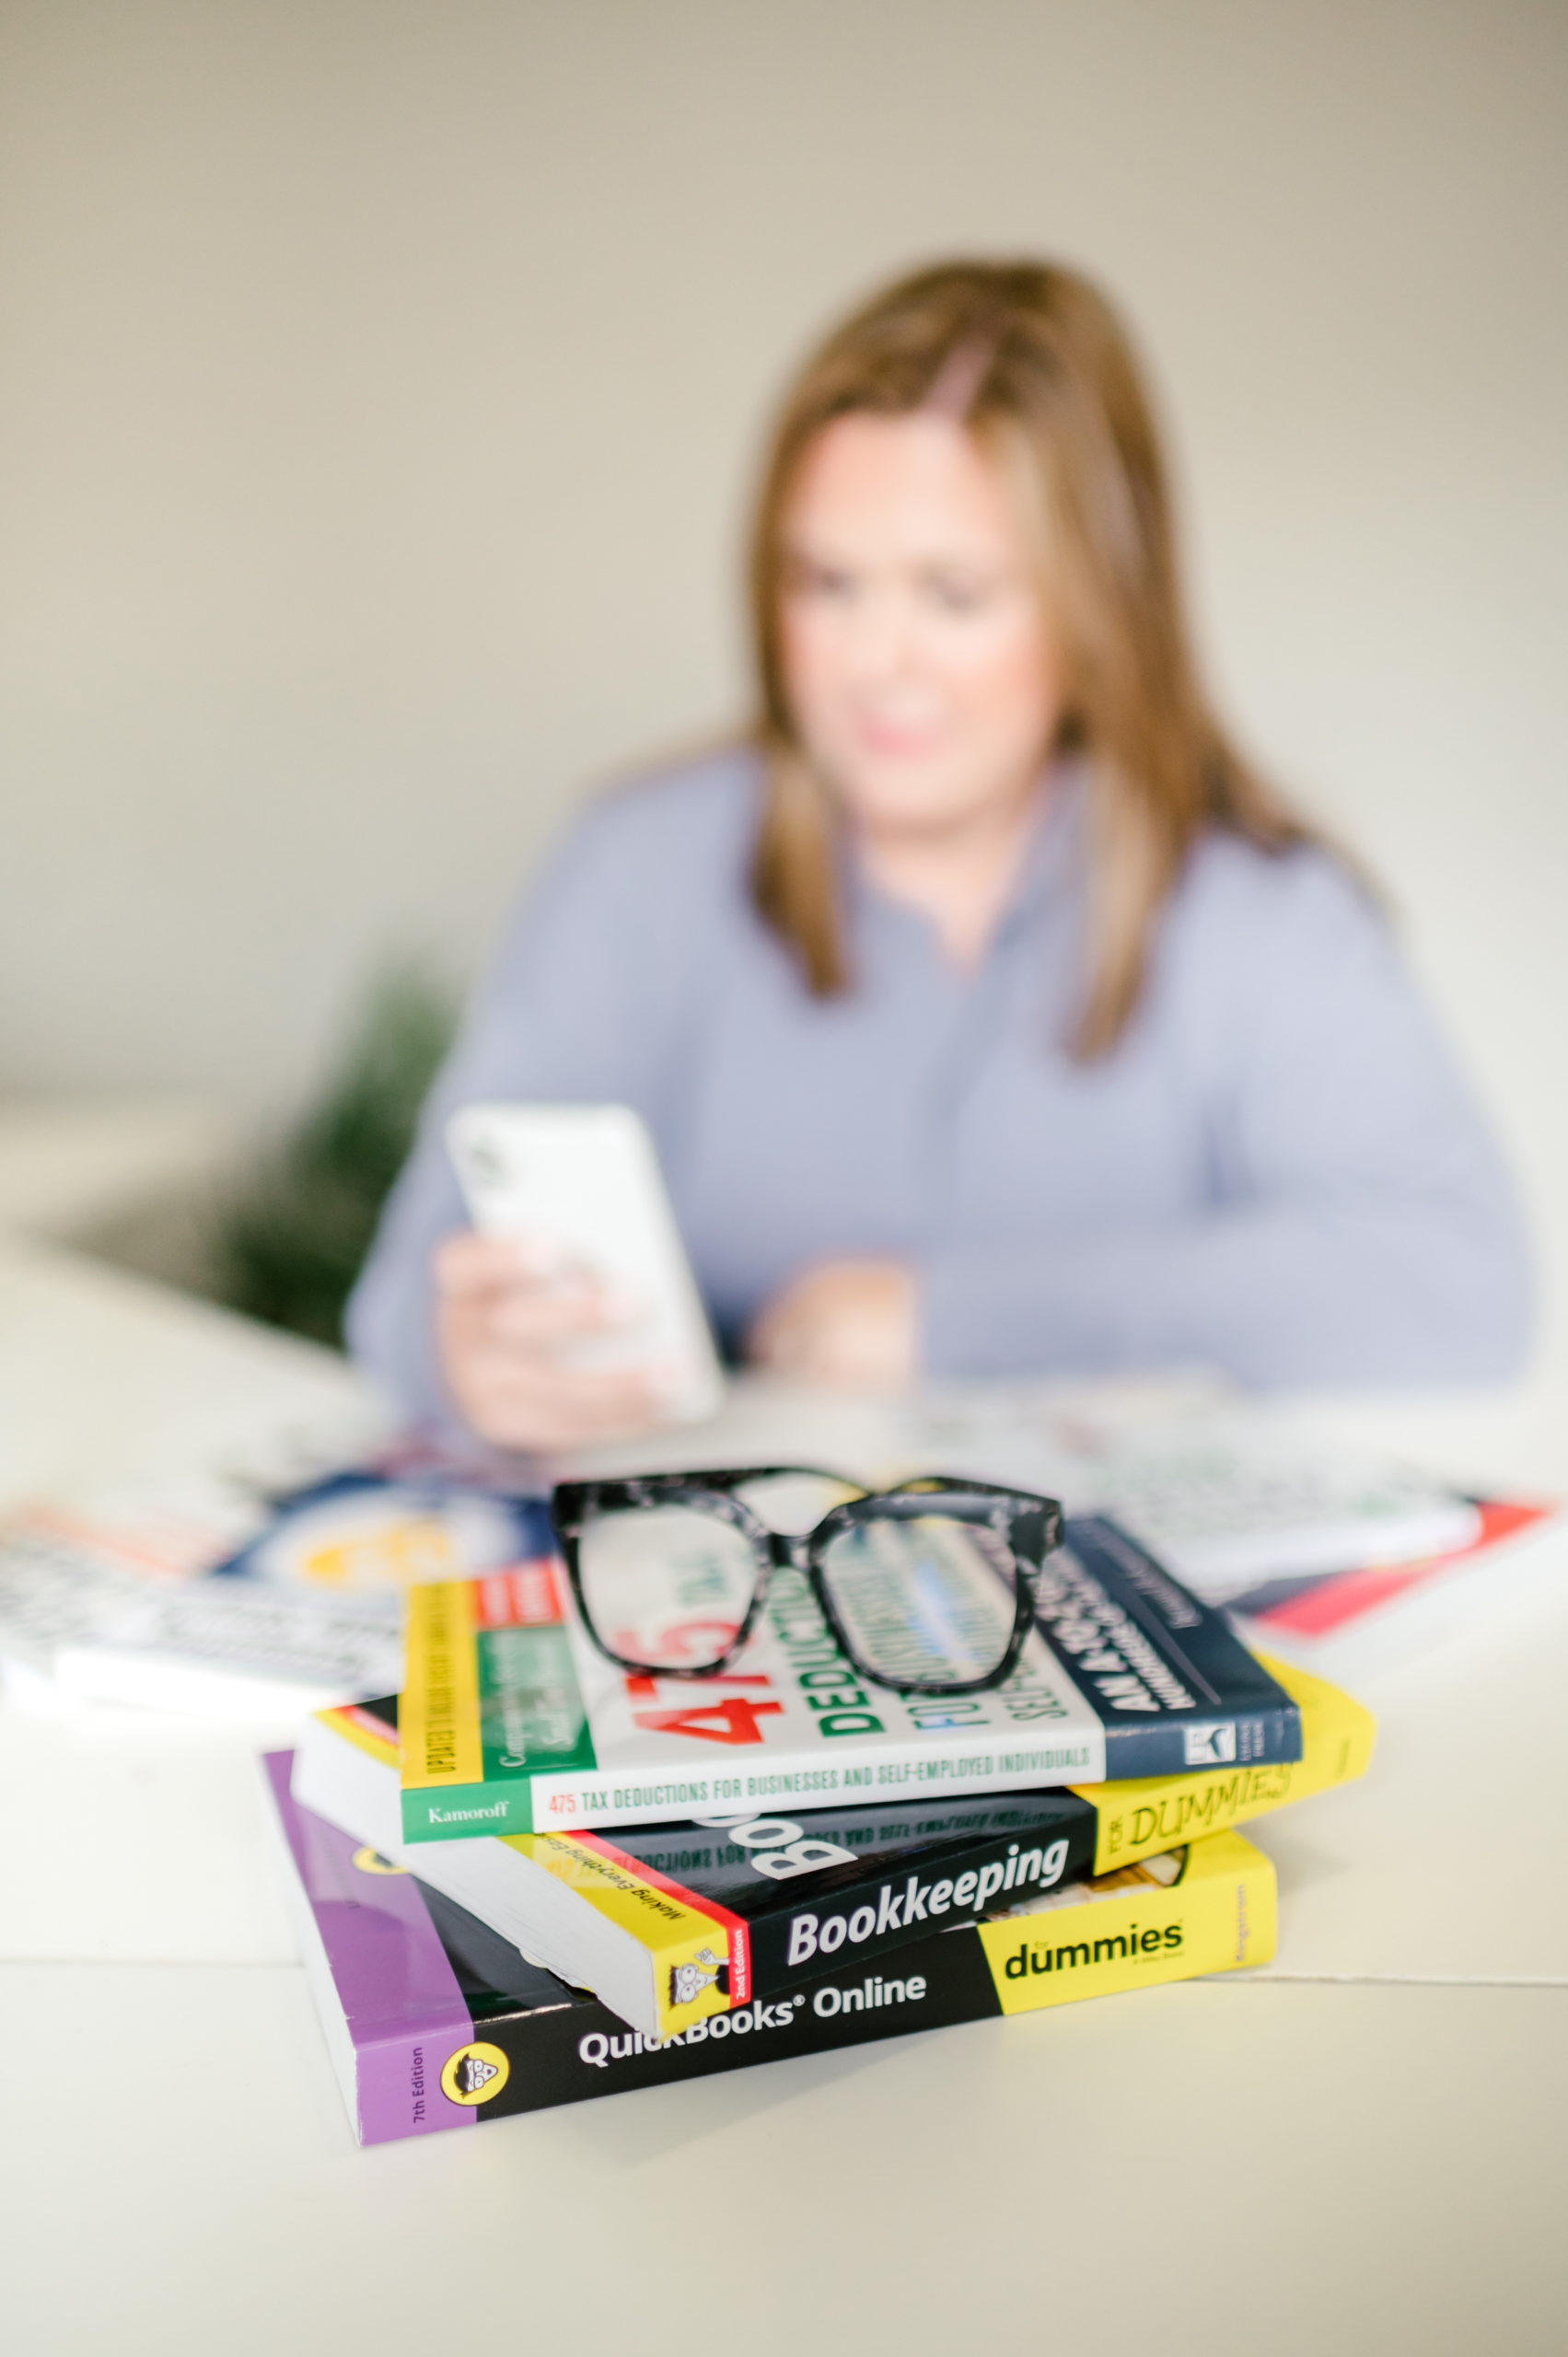 CPA business books sitting on top of a desk with a pair of reading glasses